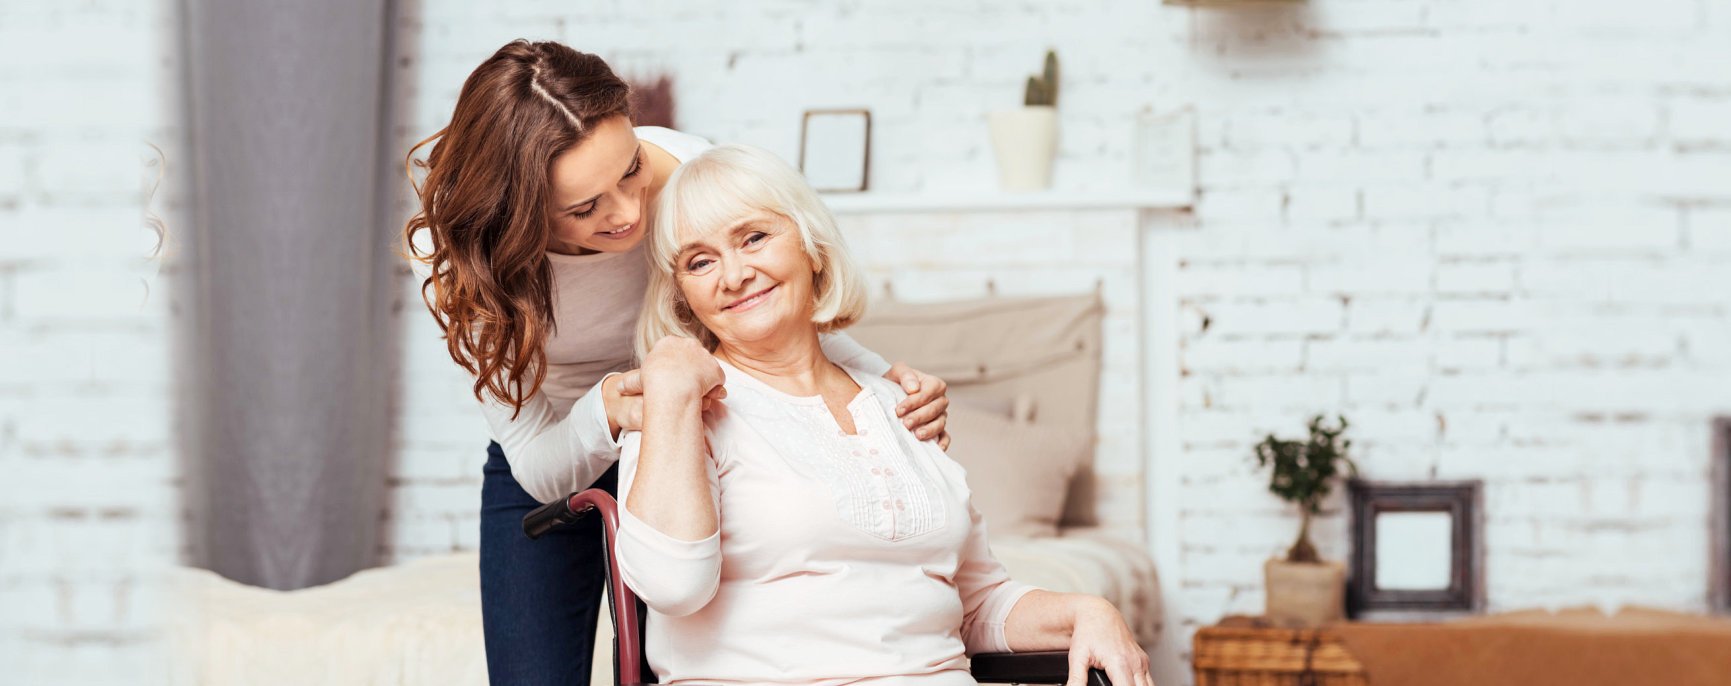 Caregiver smiling with an elderly